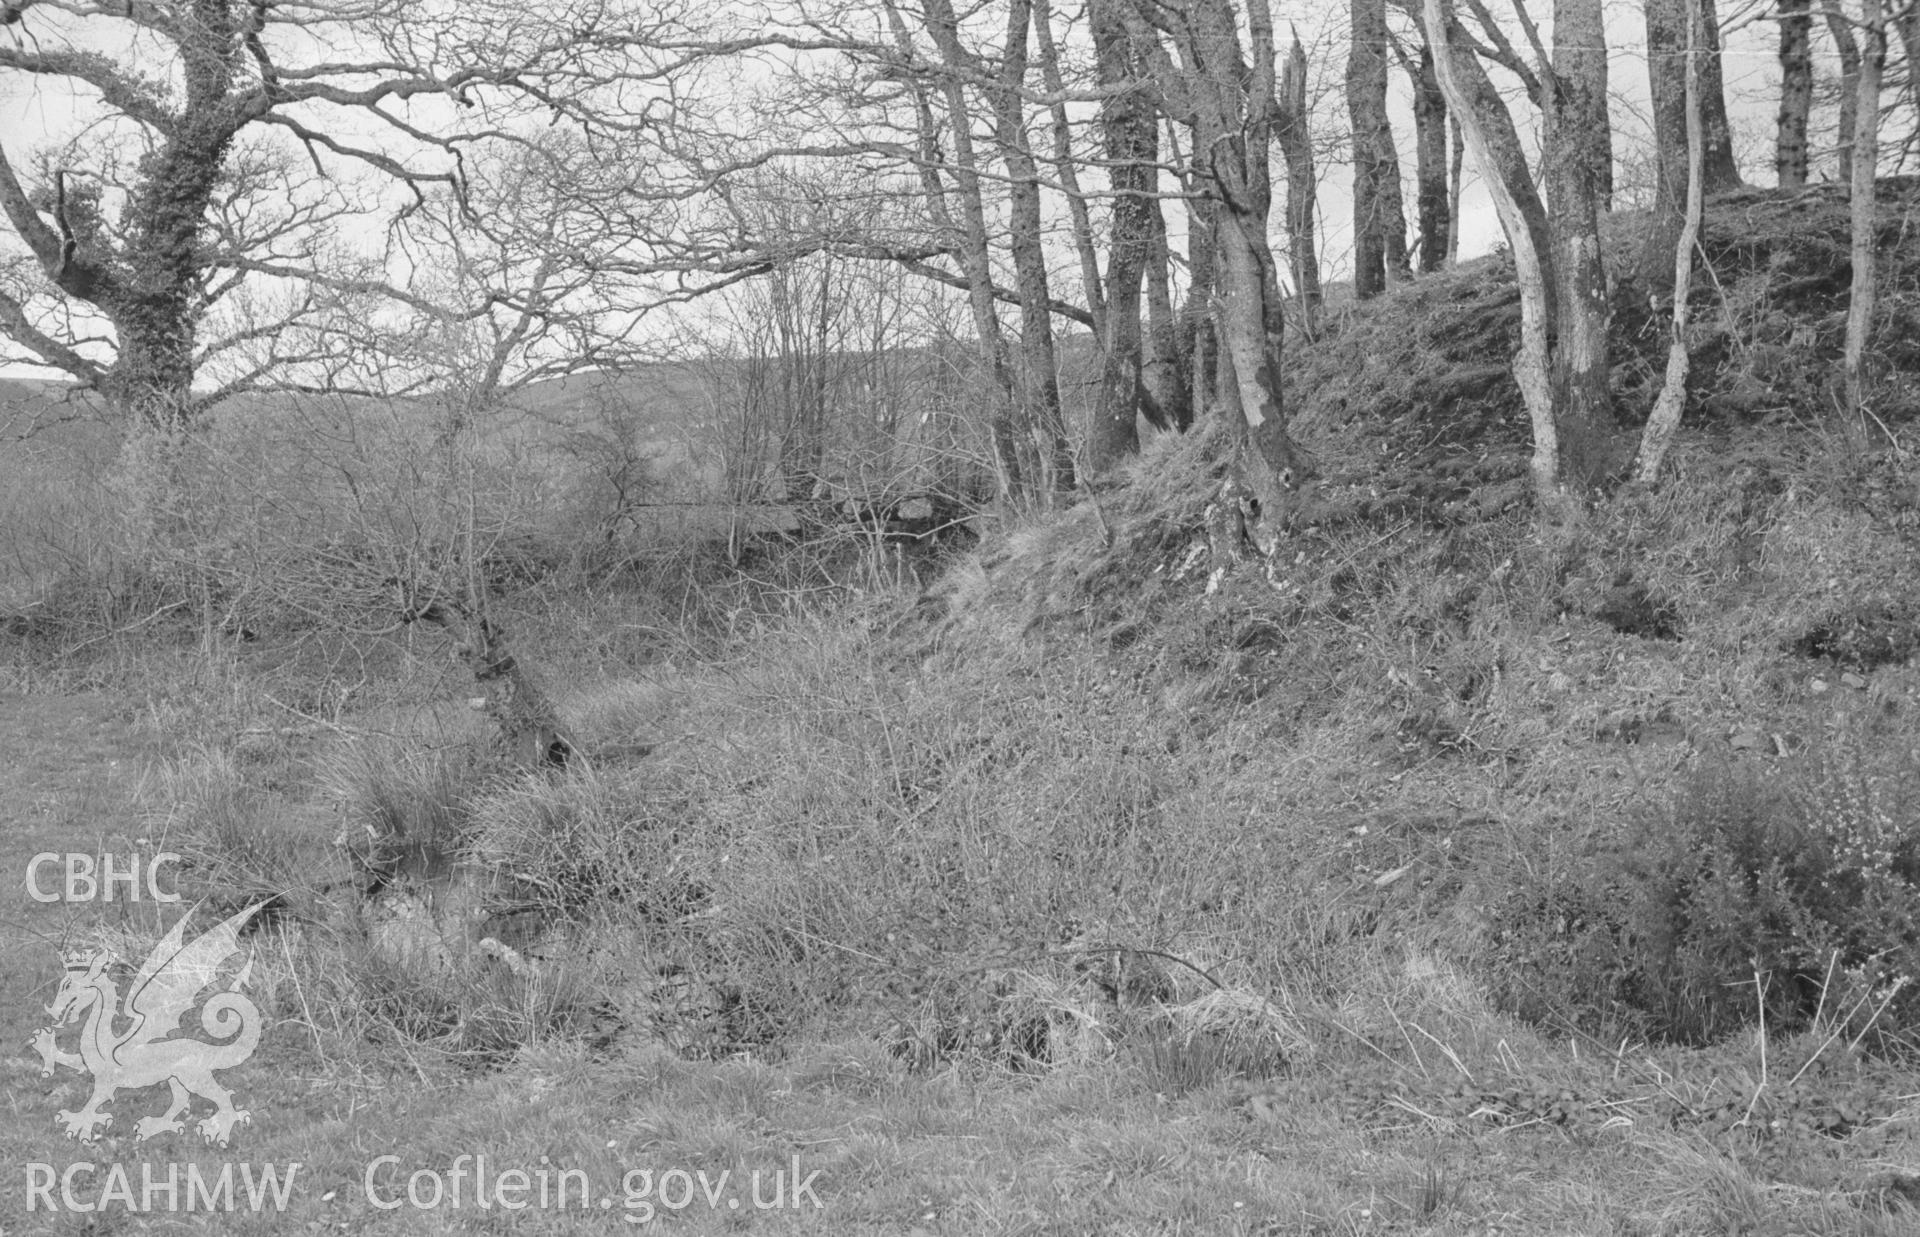 Digital copy of a black and white negative showing the west side of Castell Nant-y-Garan motte and surrounding flooded ditch, Llandyfriog. Photographed by Arthur O. Chater in April 1966 from Grid Reference SN 370 422, looking north west.